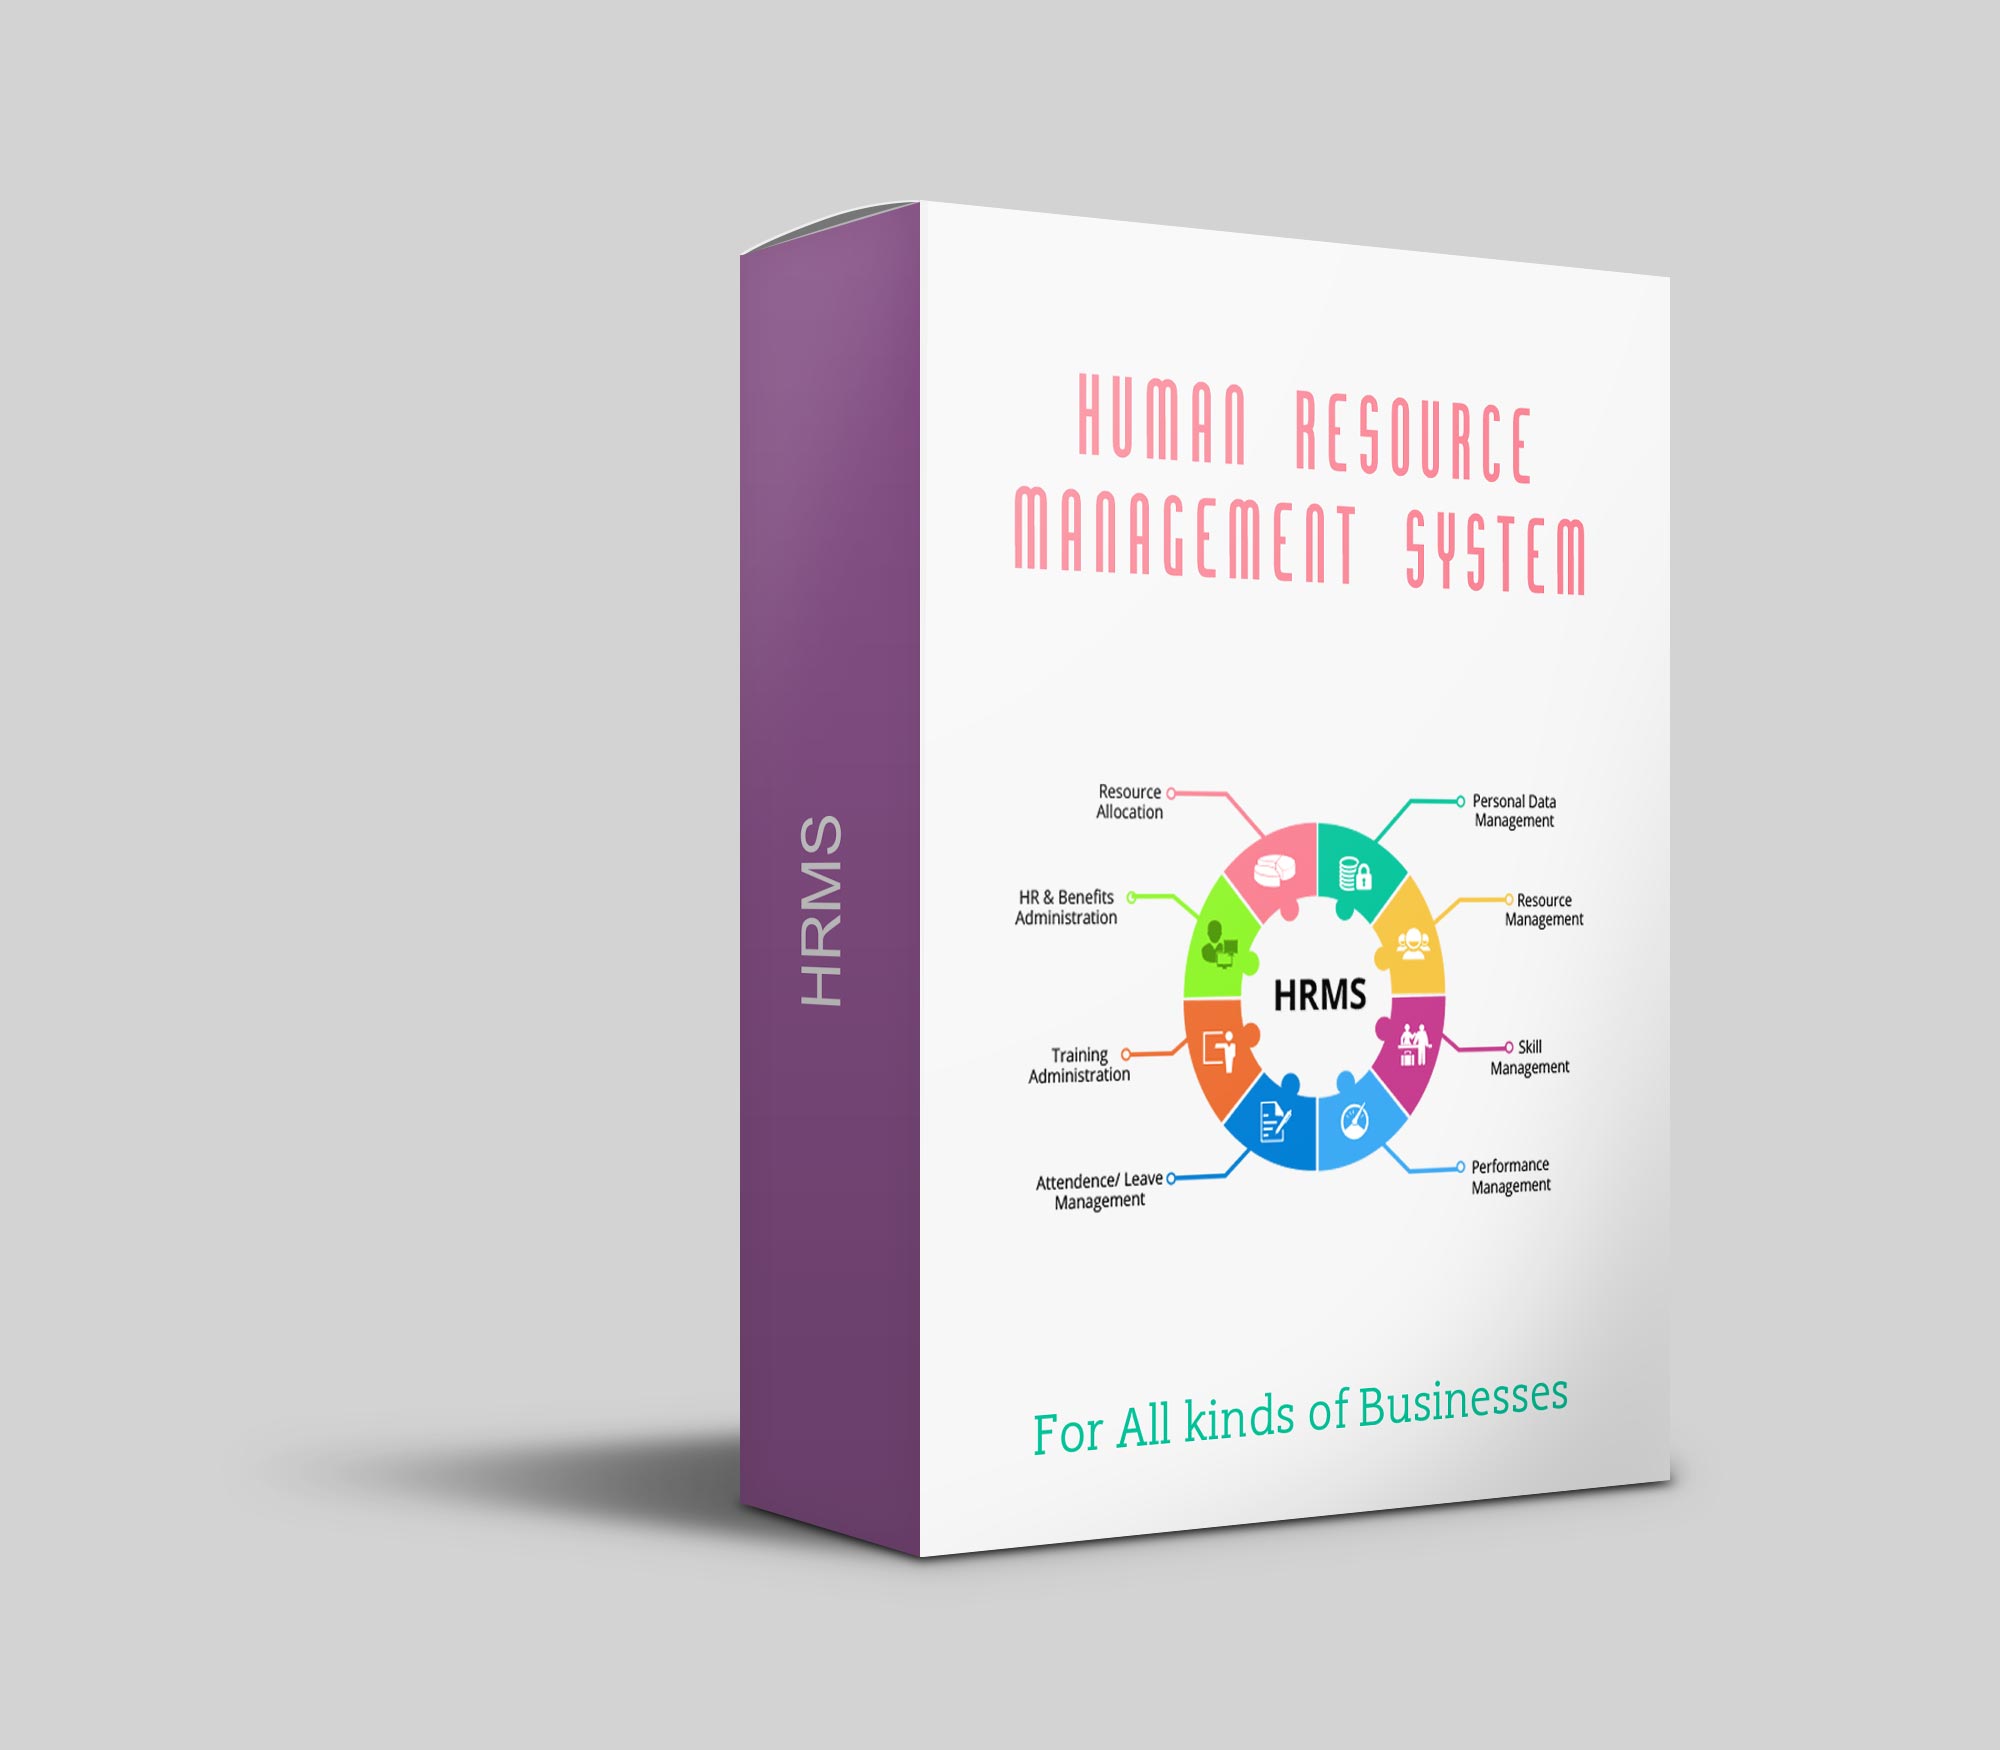 HRMS - Human Resource Management System